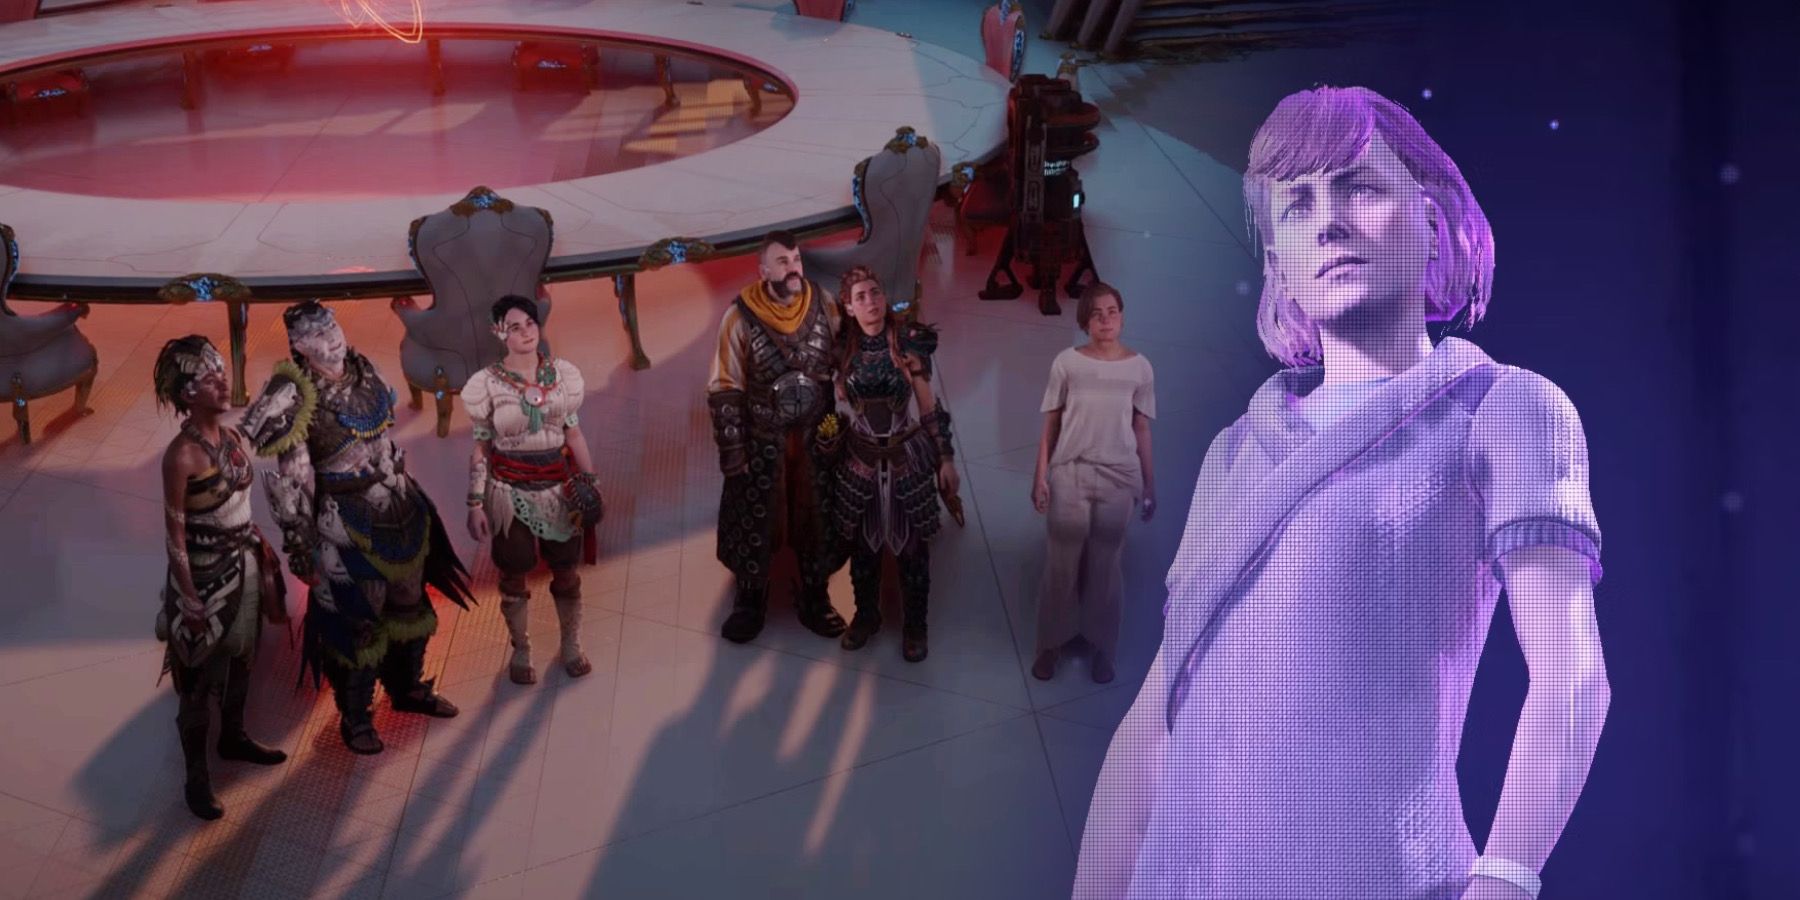 aloy's team with a hologram of elisabet sobeck at the right side